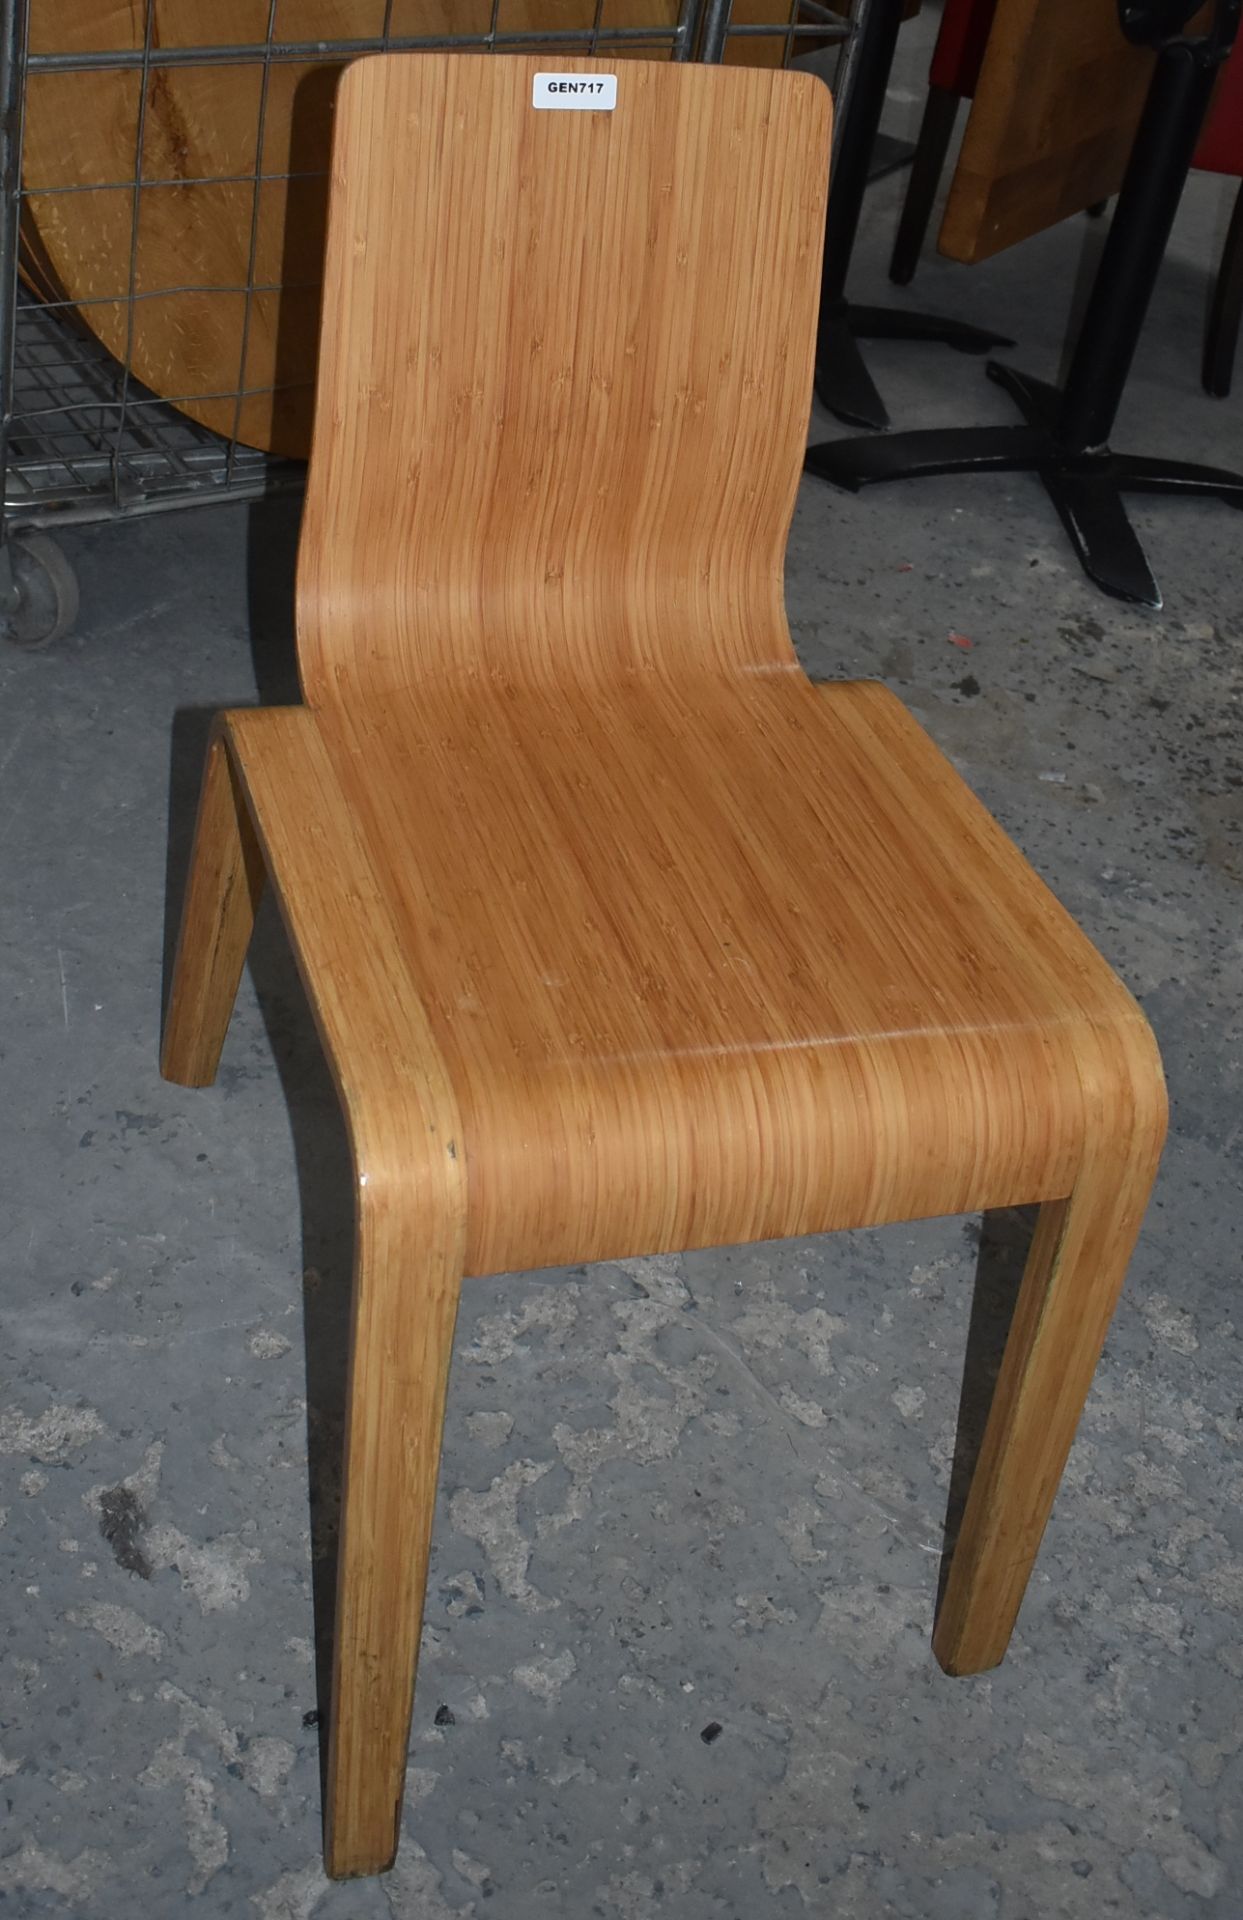 1 x Stylish Wooden Chair With A Curved Design - Dimensions: H80 x W42 x D58cm / Seat 44cm - Ref: - Image 6 of 7